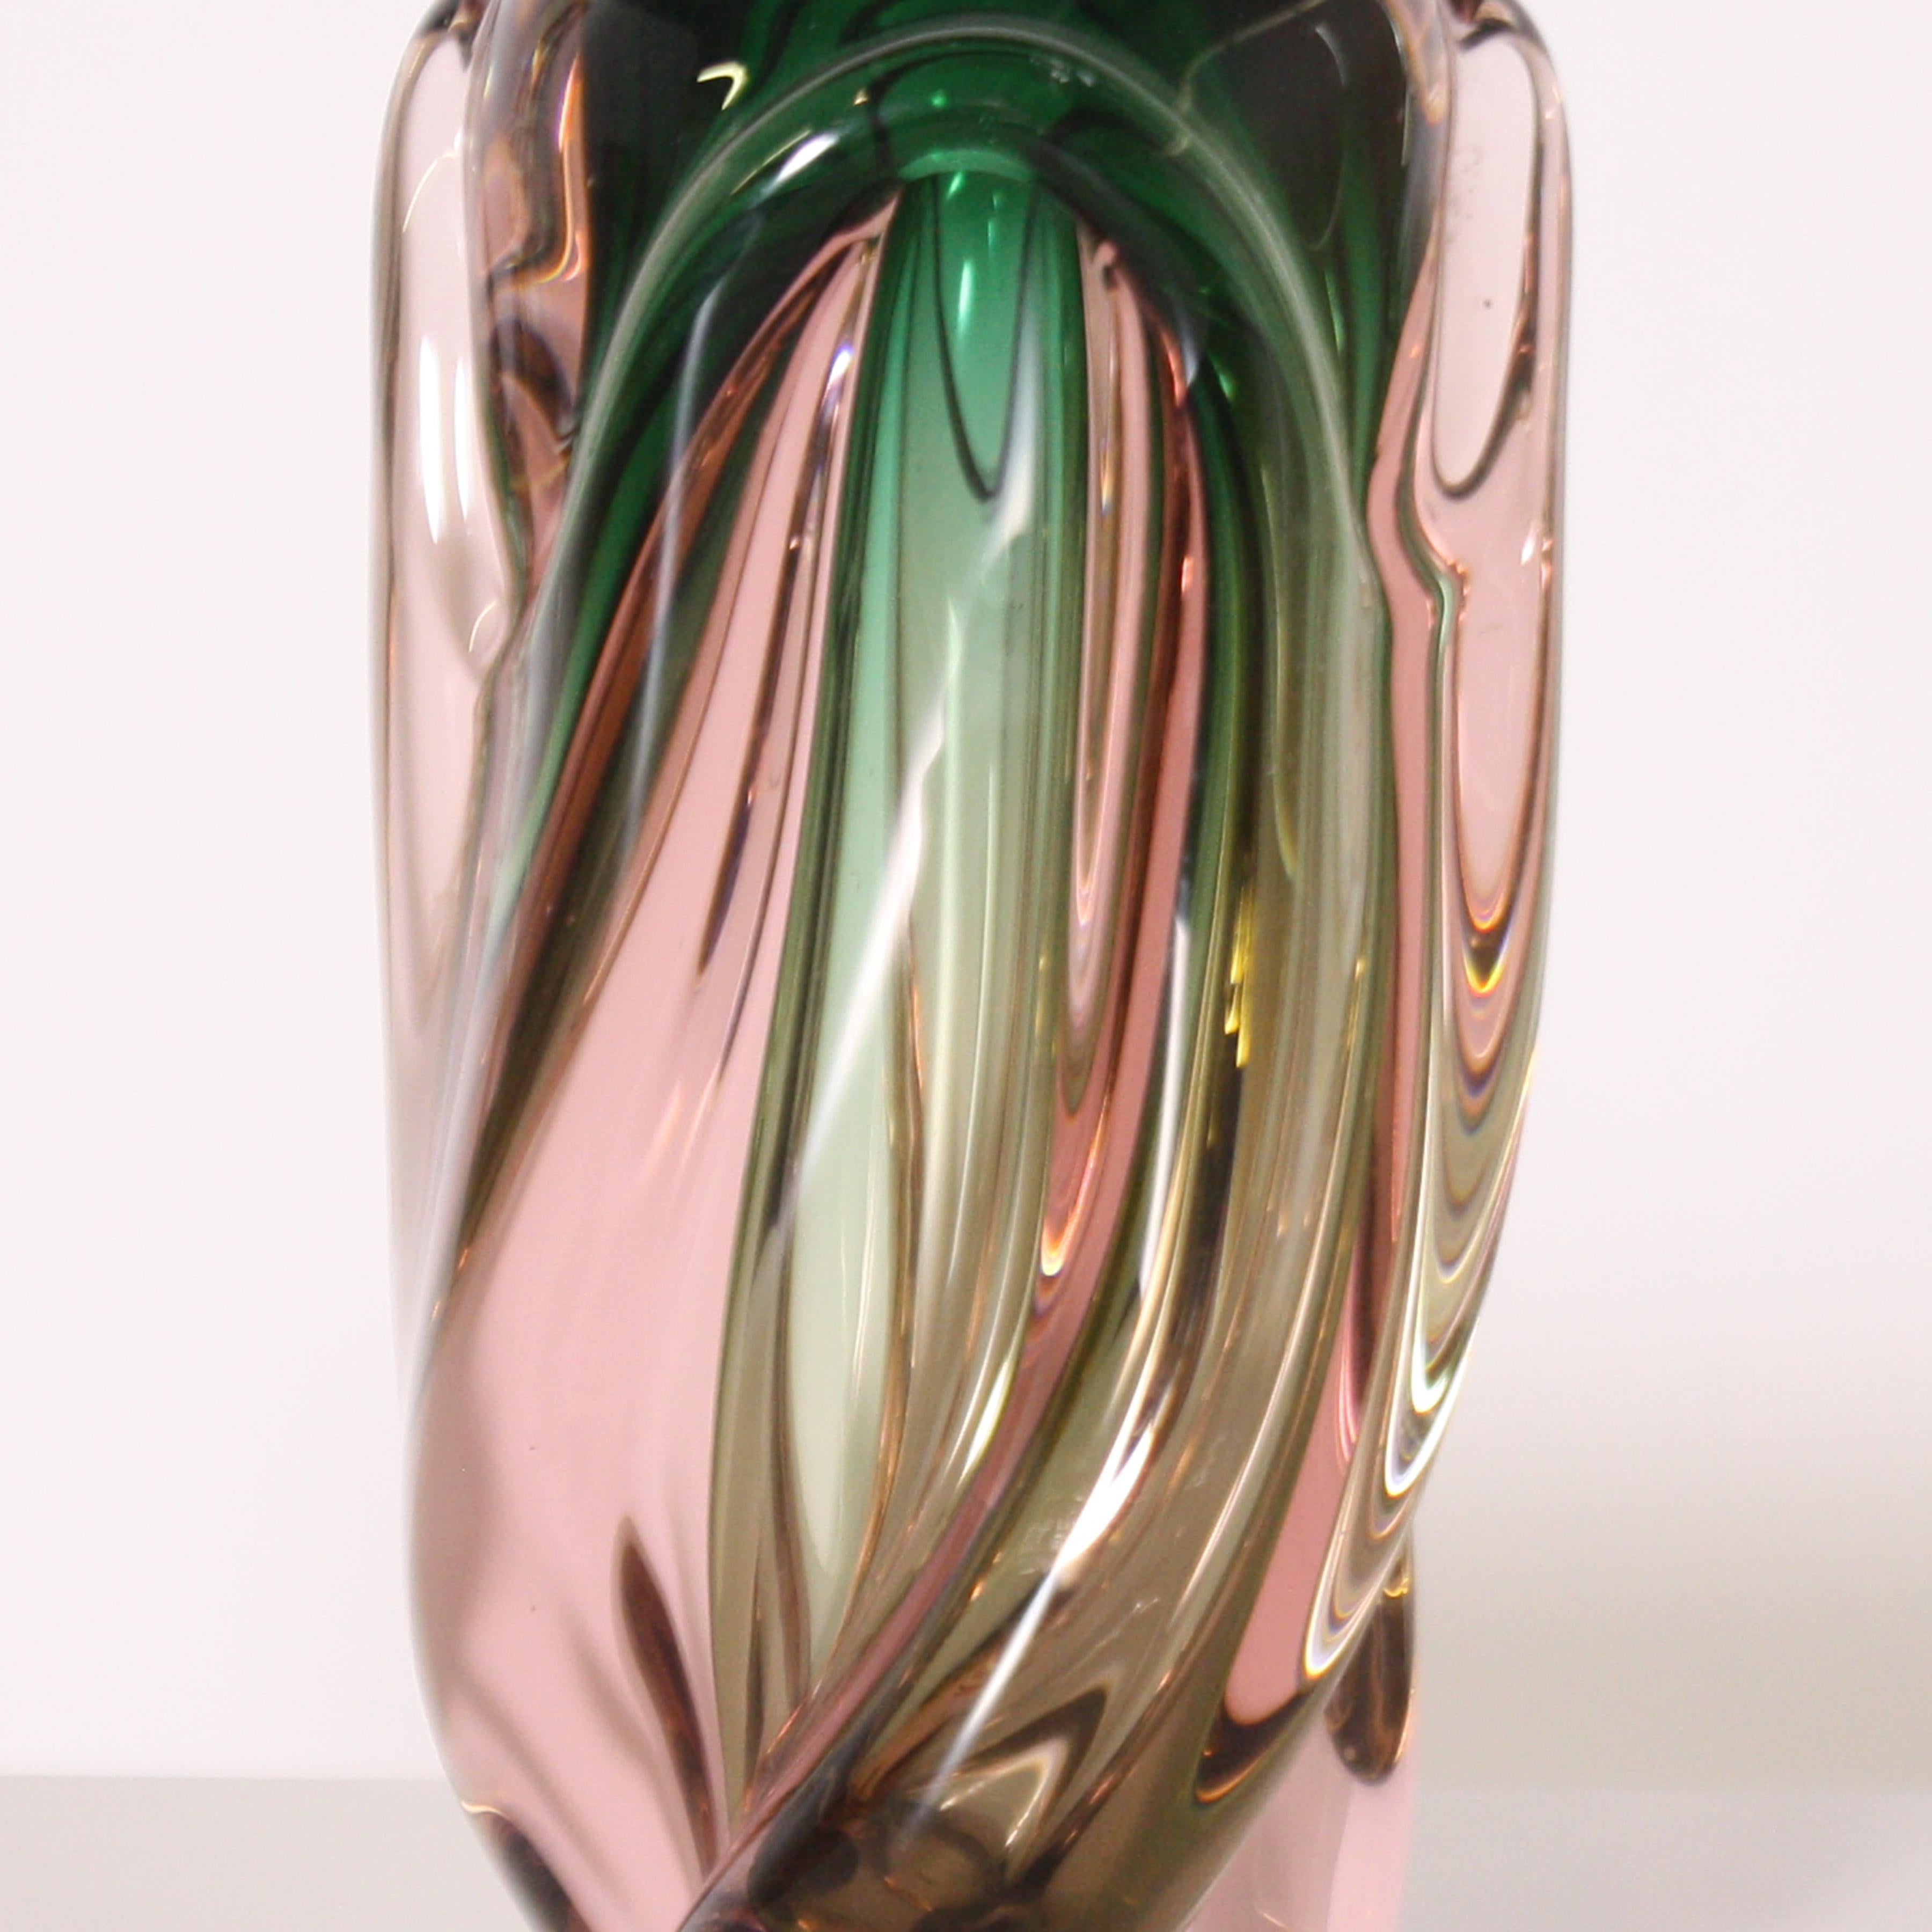 green and pink vase